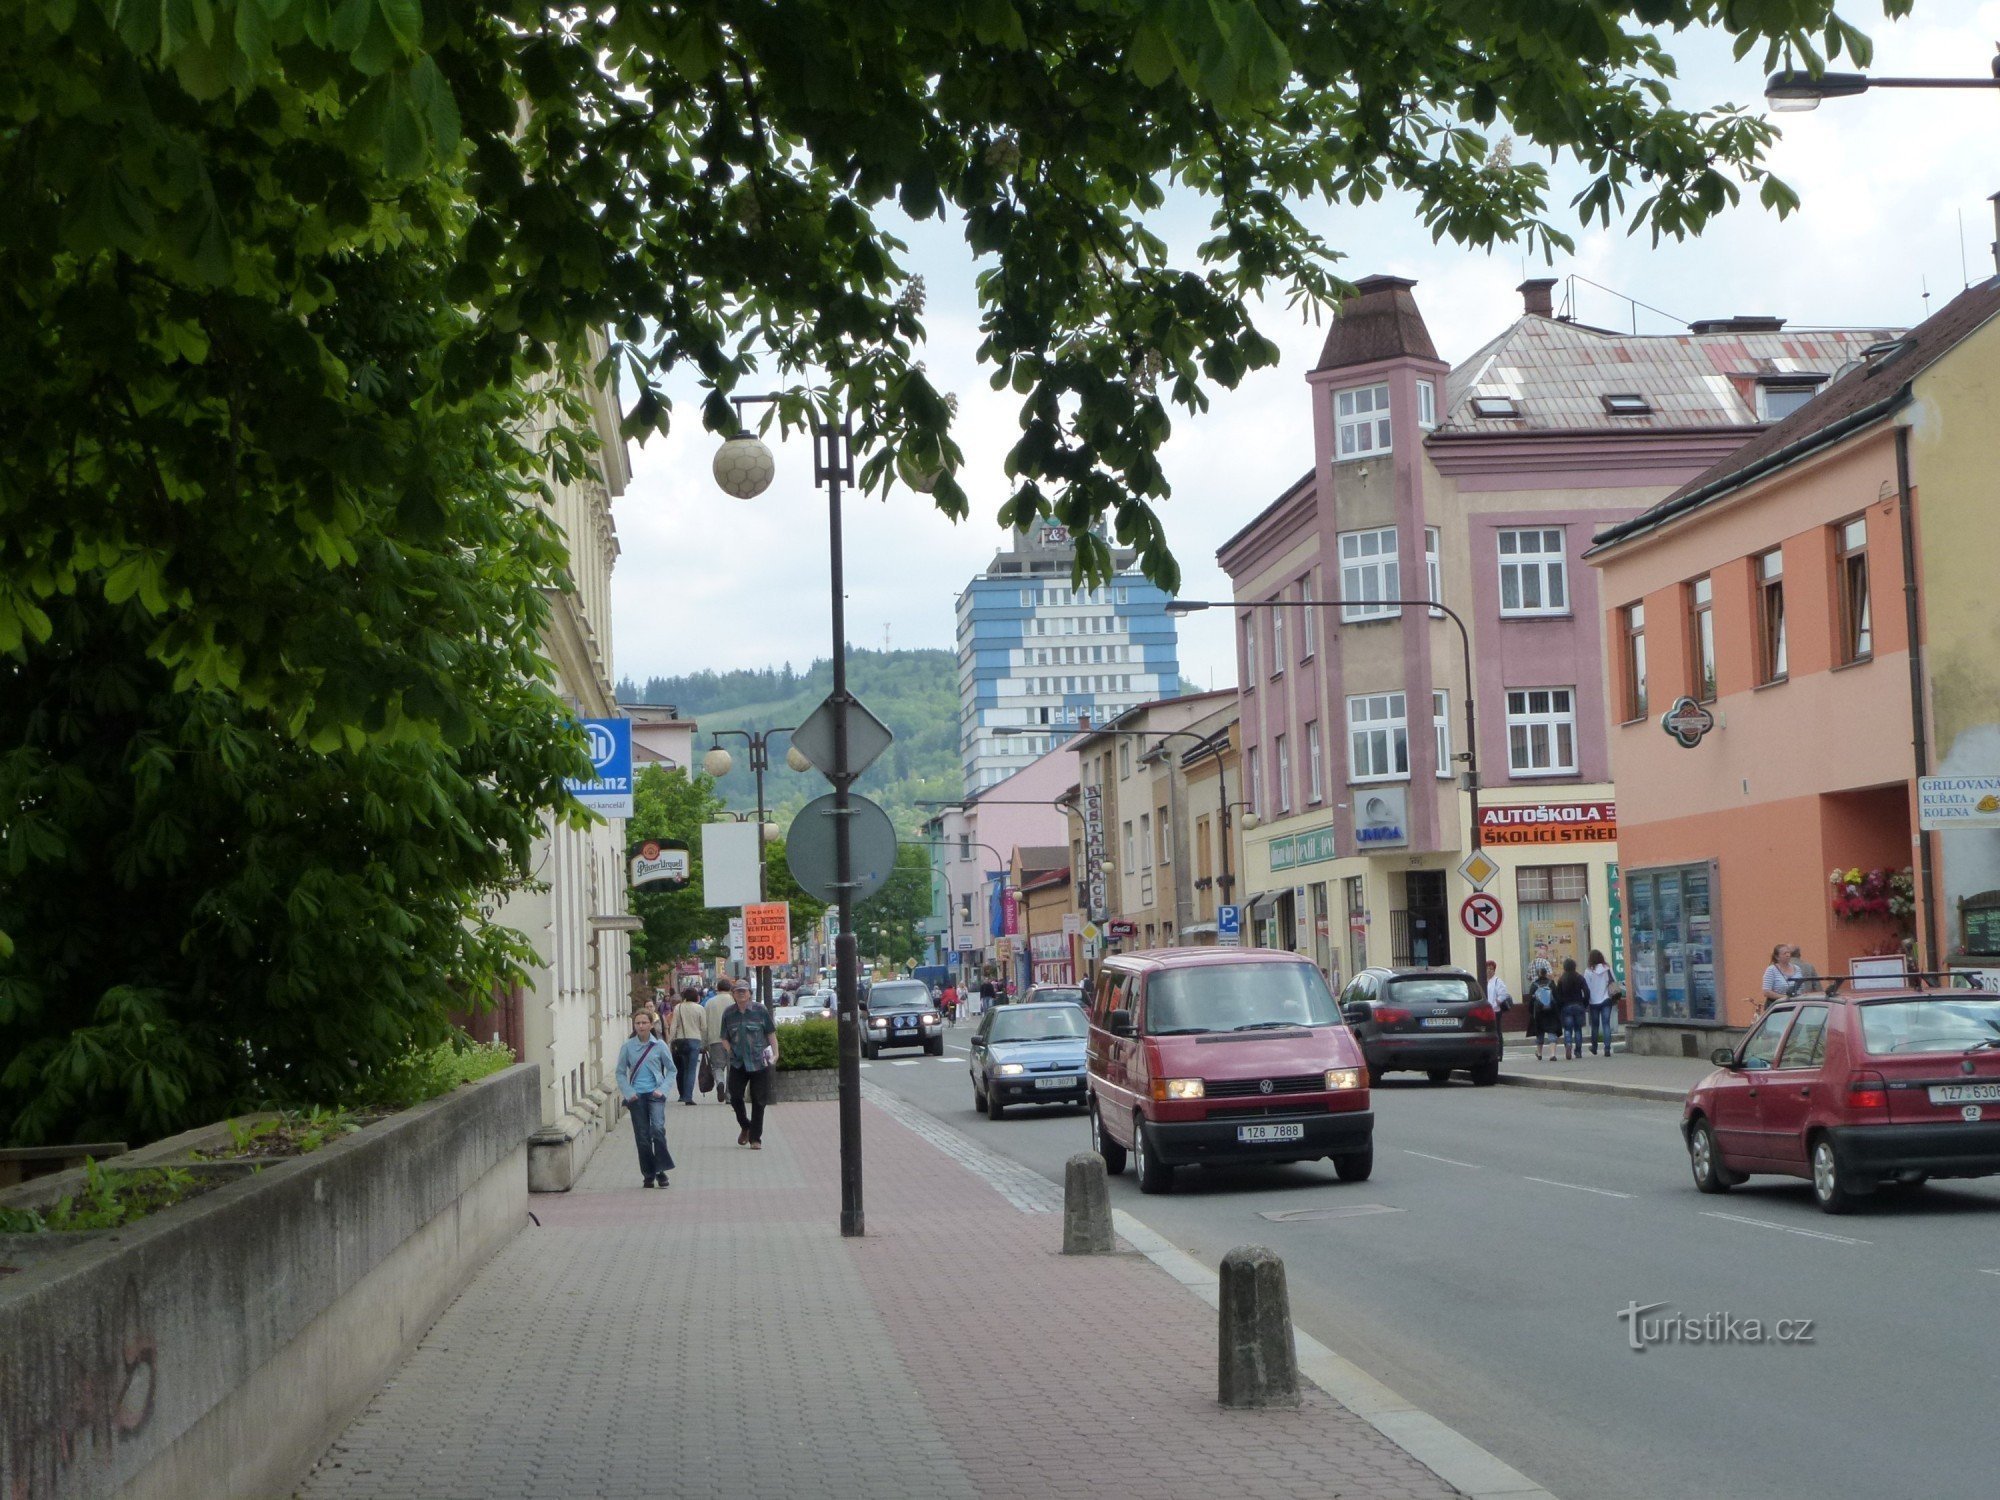 The town of Vsetin